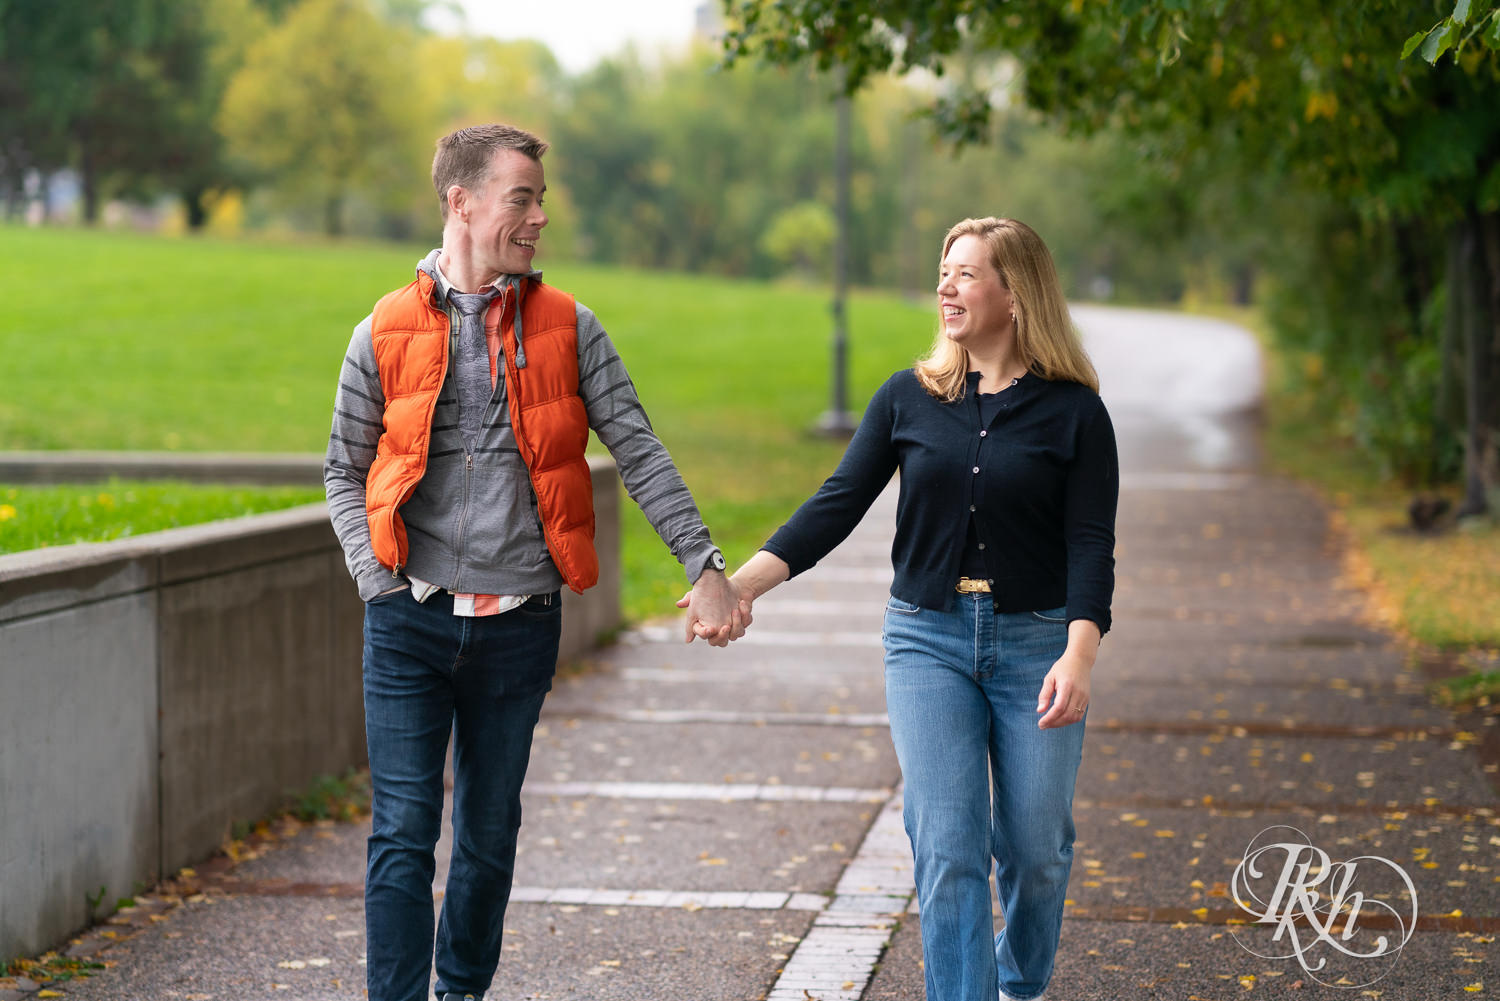 Man and woman in hoodies and jeans hold hands during rainy engagement photos at Boom Island Park in Minneapolis, Minnesota.